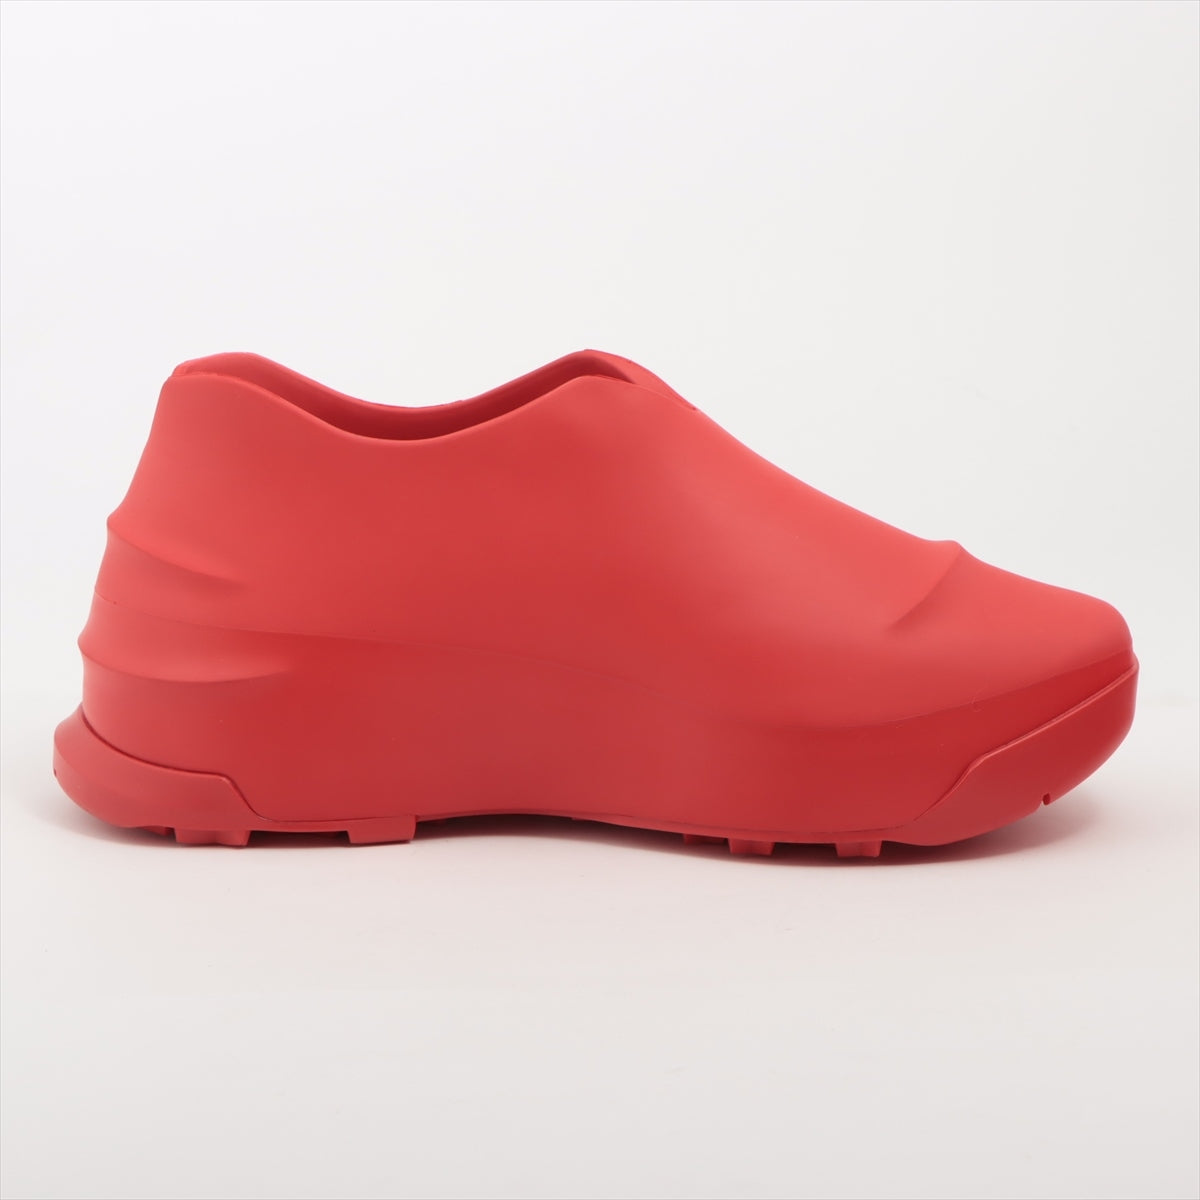 Givenchy Rubber Sneakers 41 Men's Red Monumental Mallow box There is a bag